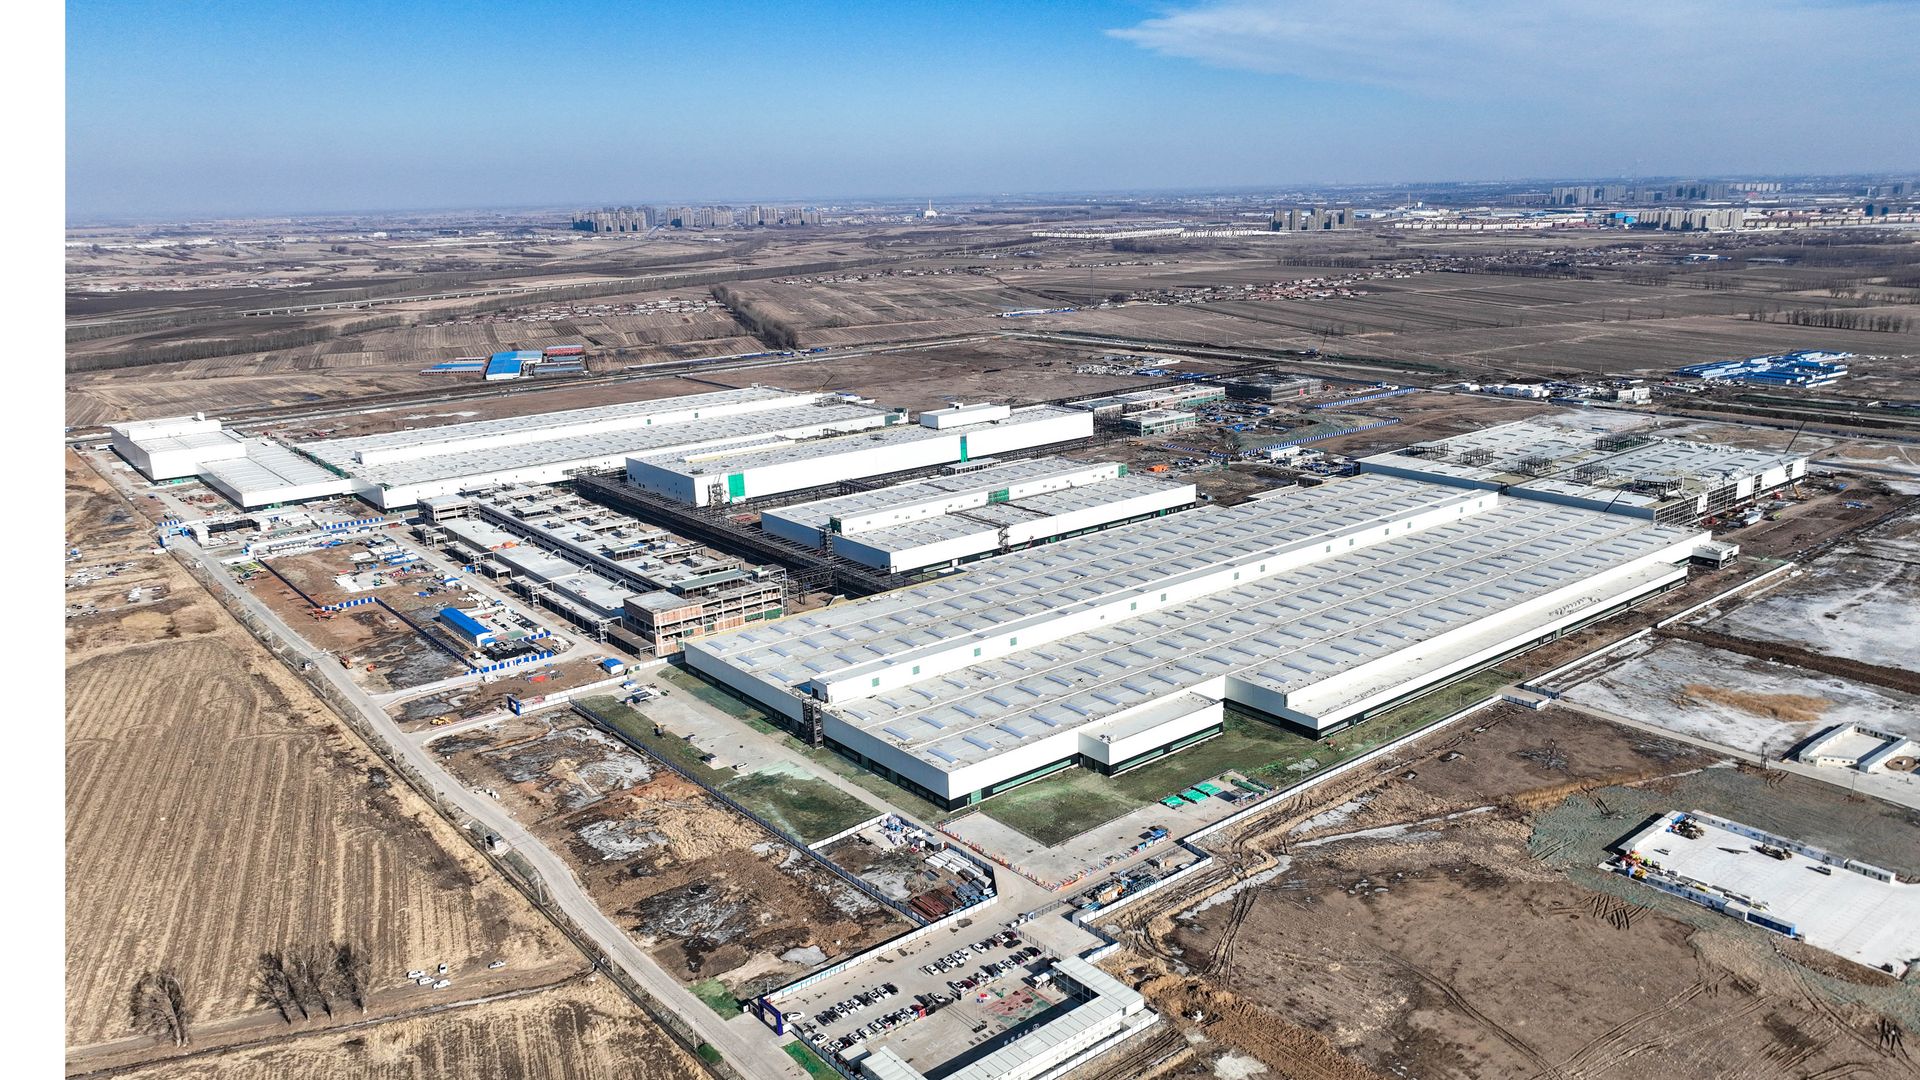 Audi FAW NEV Company is building a production site for all-electric Audi models based on the PPE platform in Changchun, China. The photo shows the status of construction work at the beginning of March 2023.